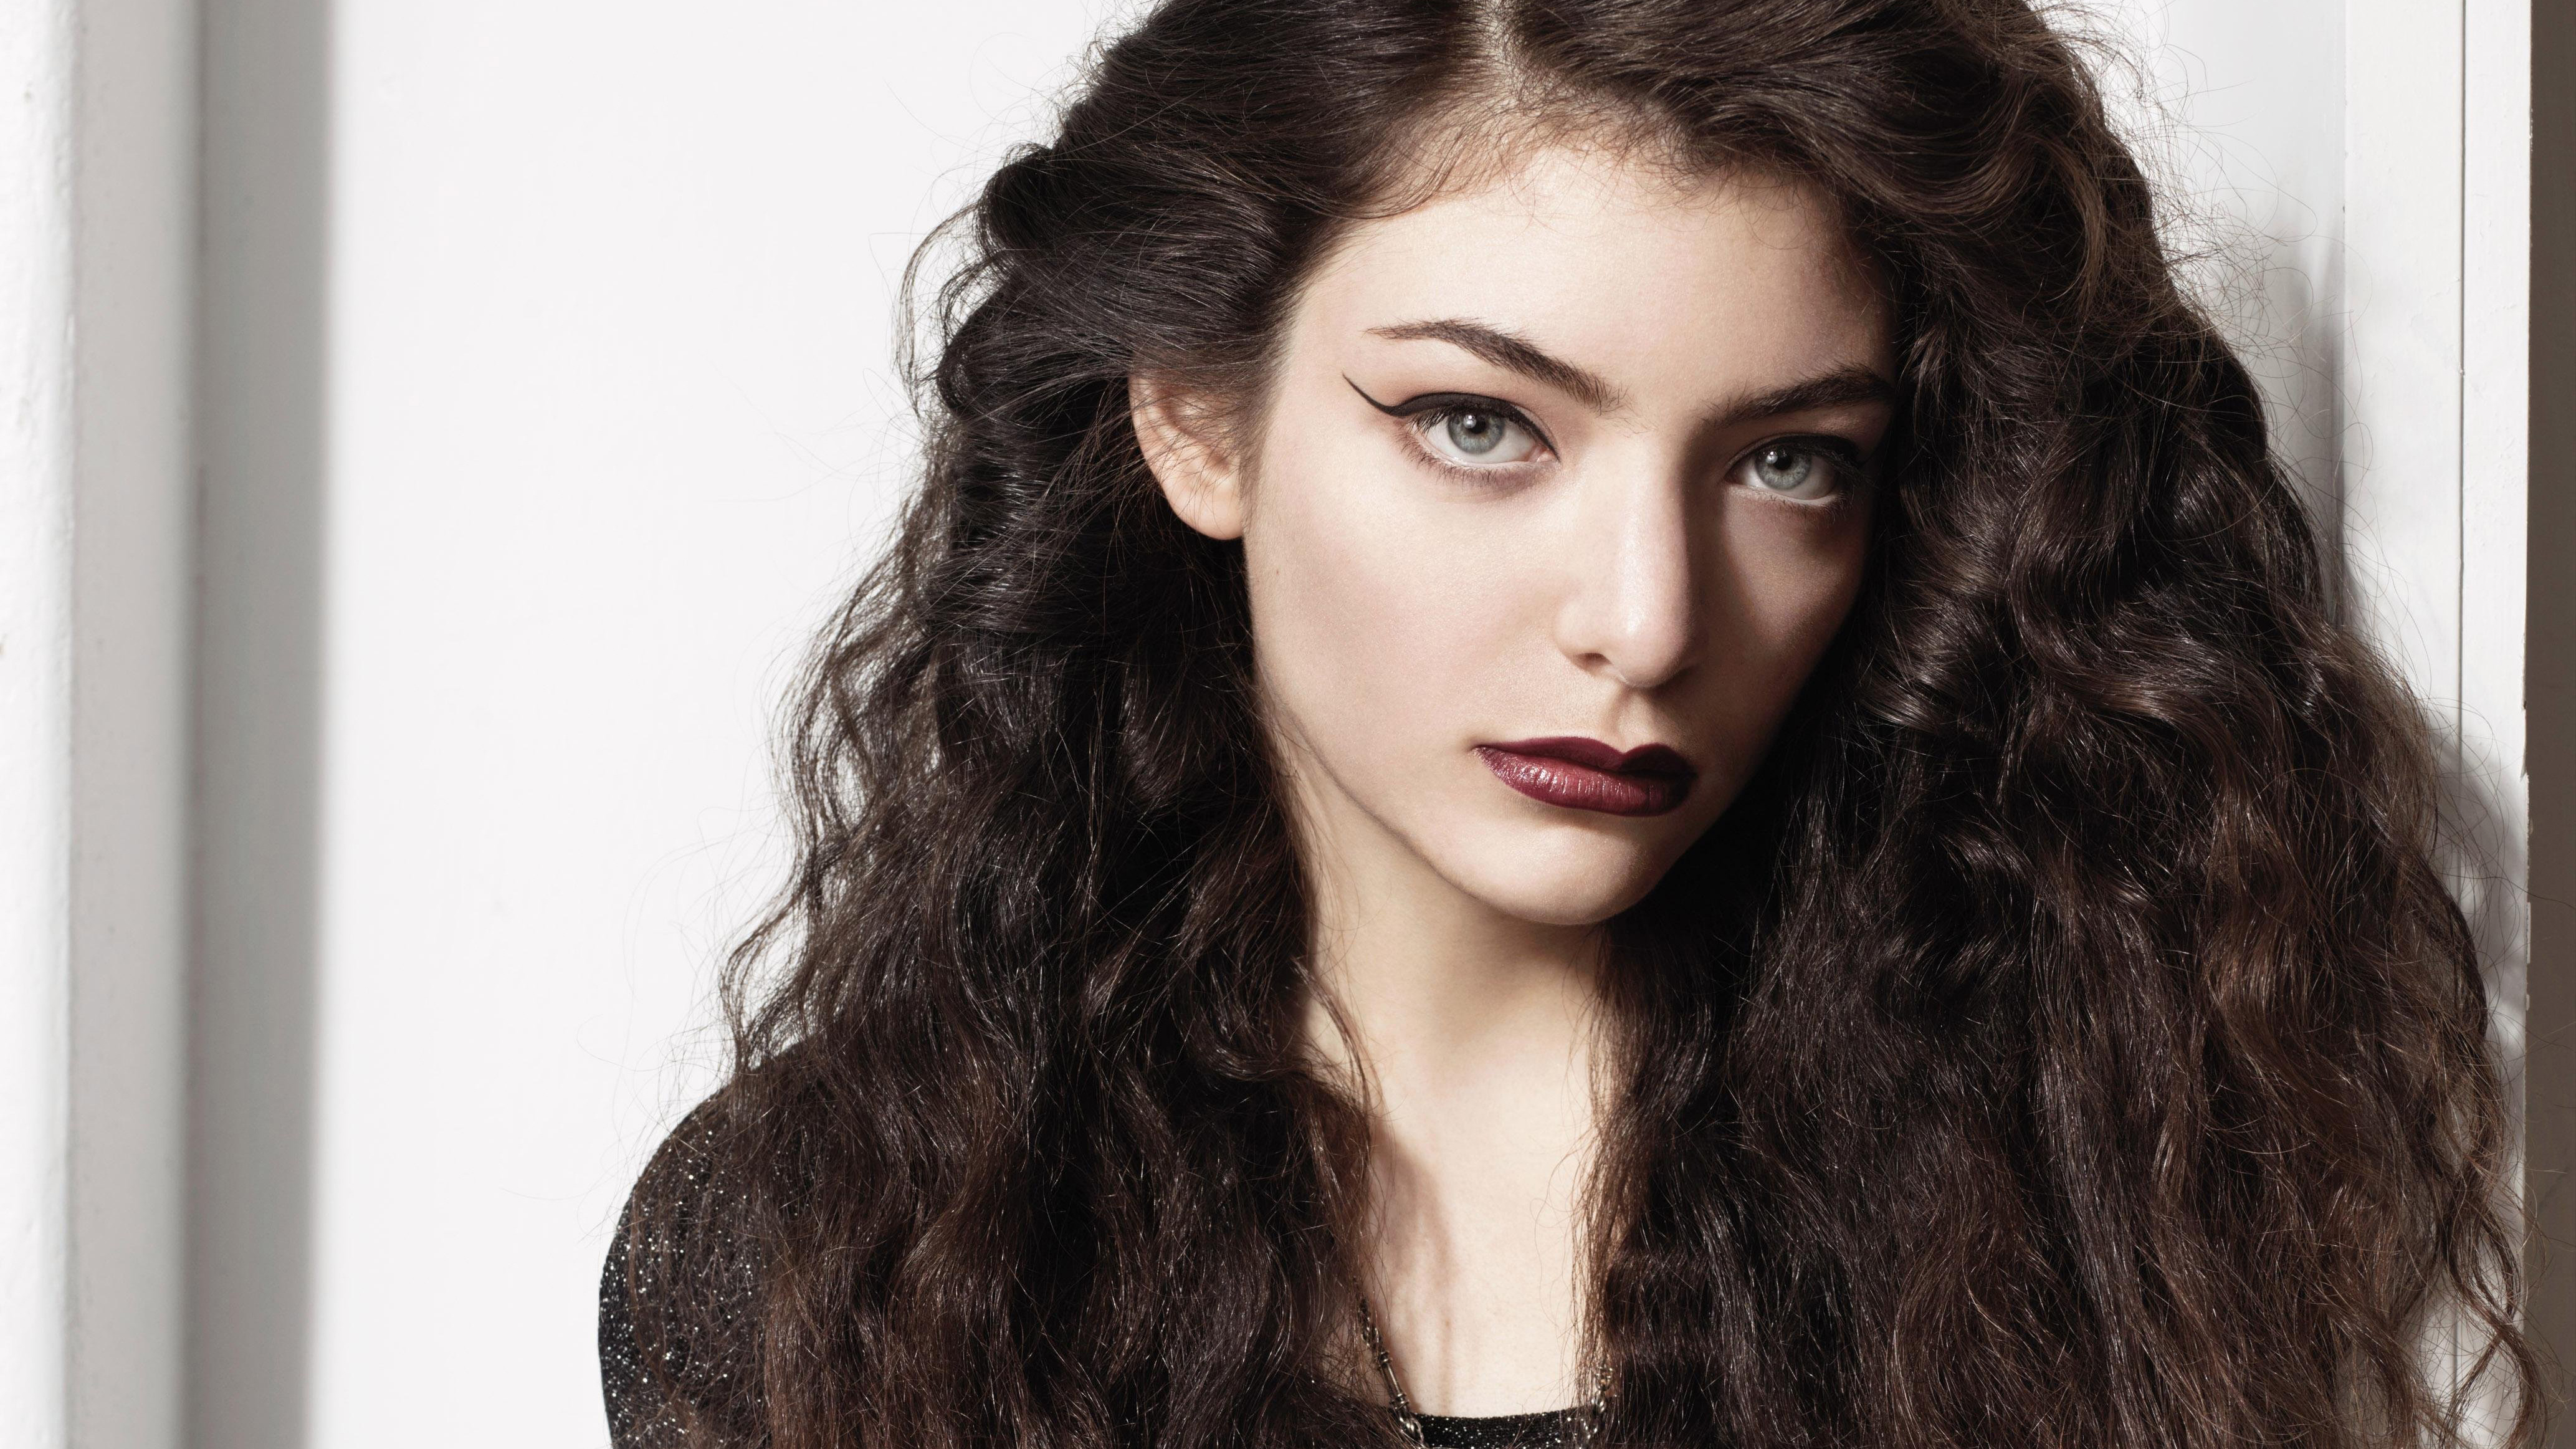 Lorde 2019 4k, HD Celebrities, 4k Wallpaper, Image, Background, Photo and Picture